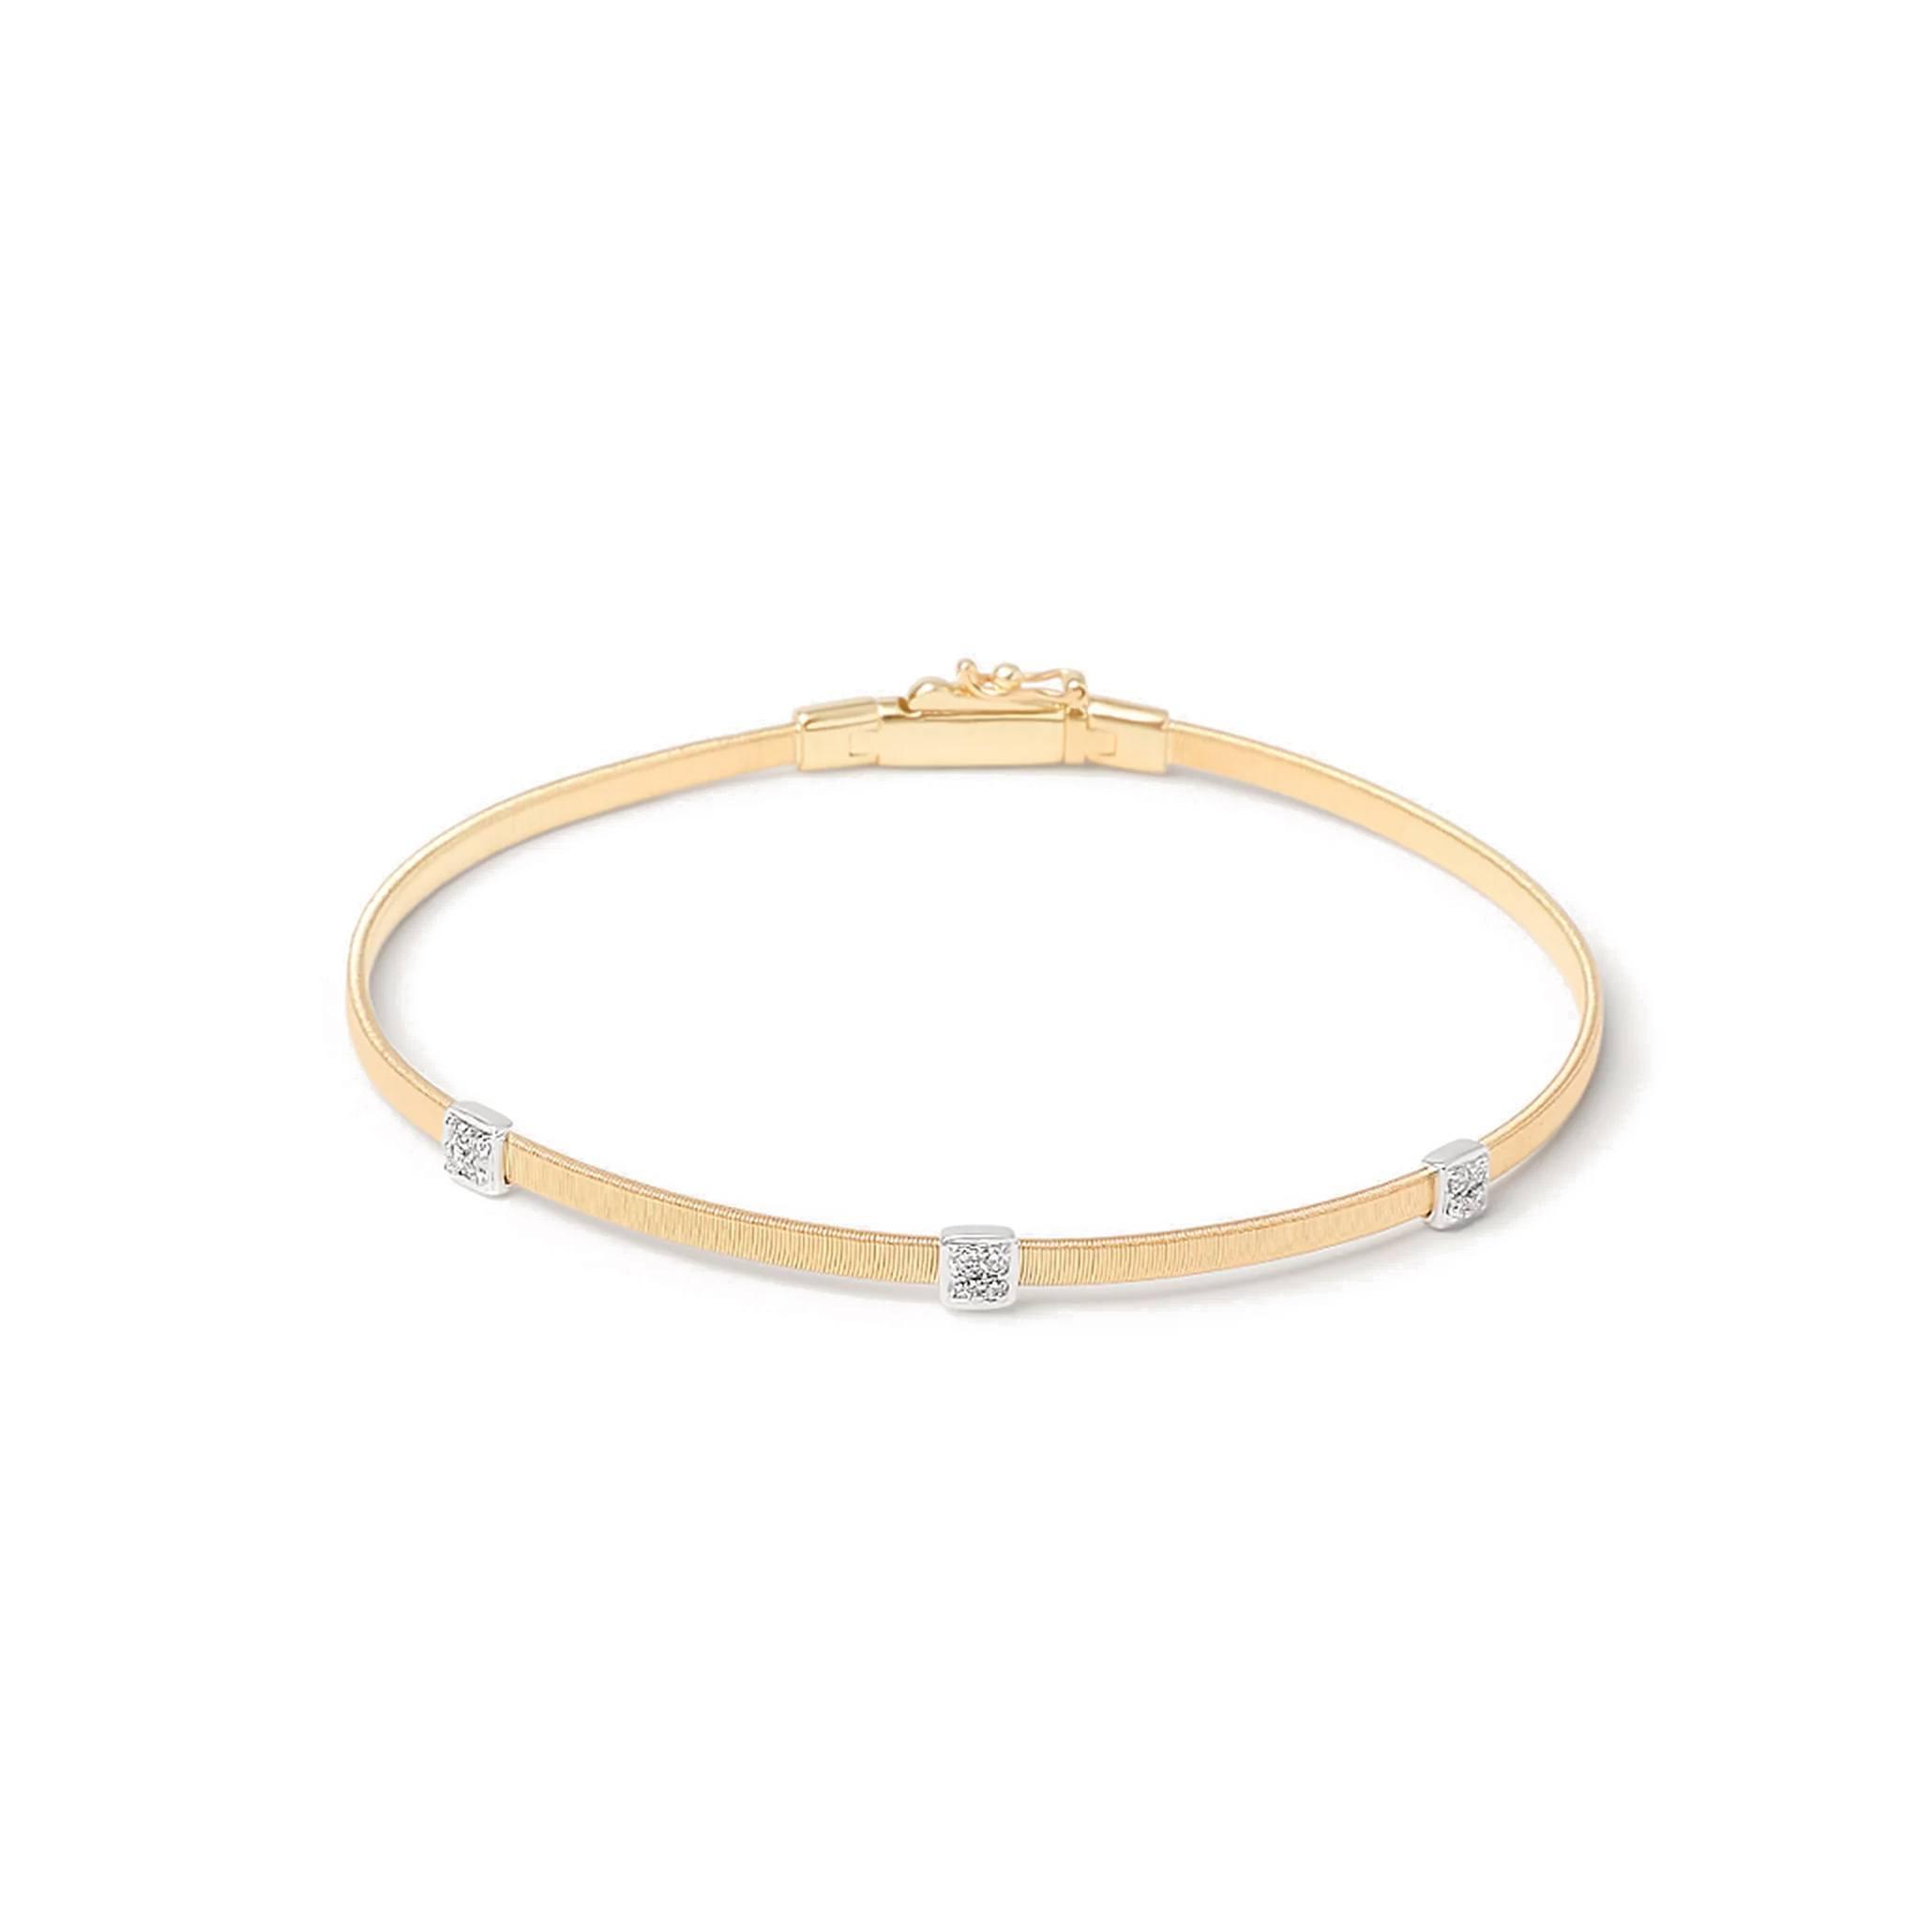 Marco Bicego Masai Collection 18K Yellow Gold and Diamond Small Three Station Bracelet